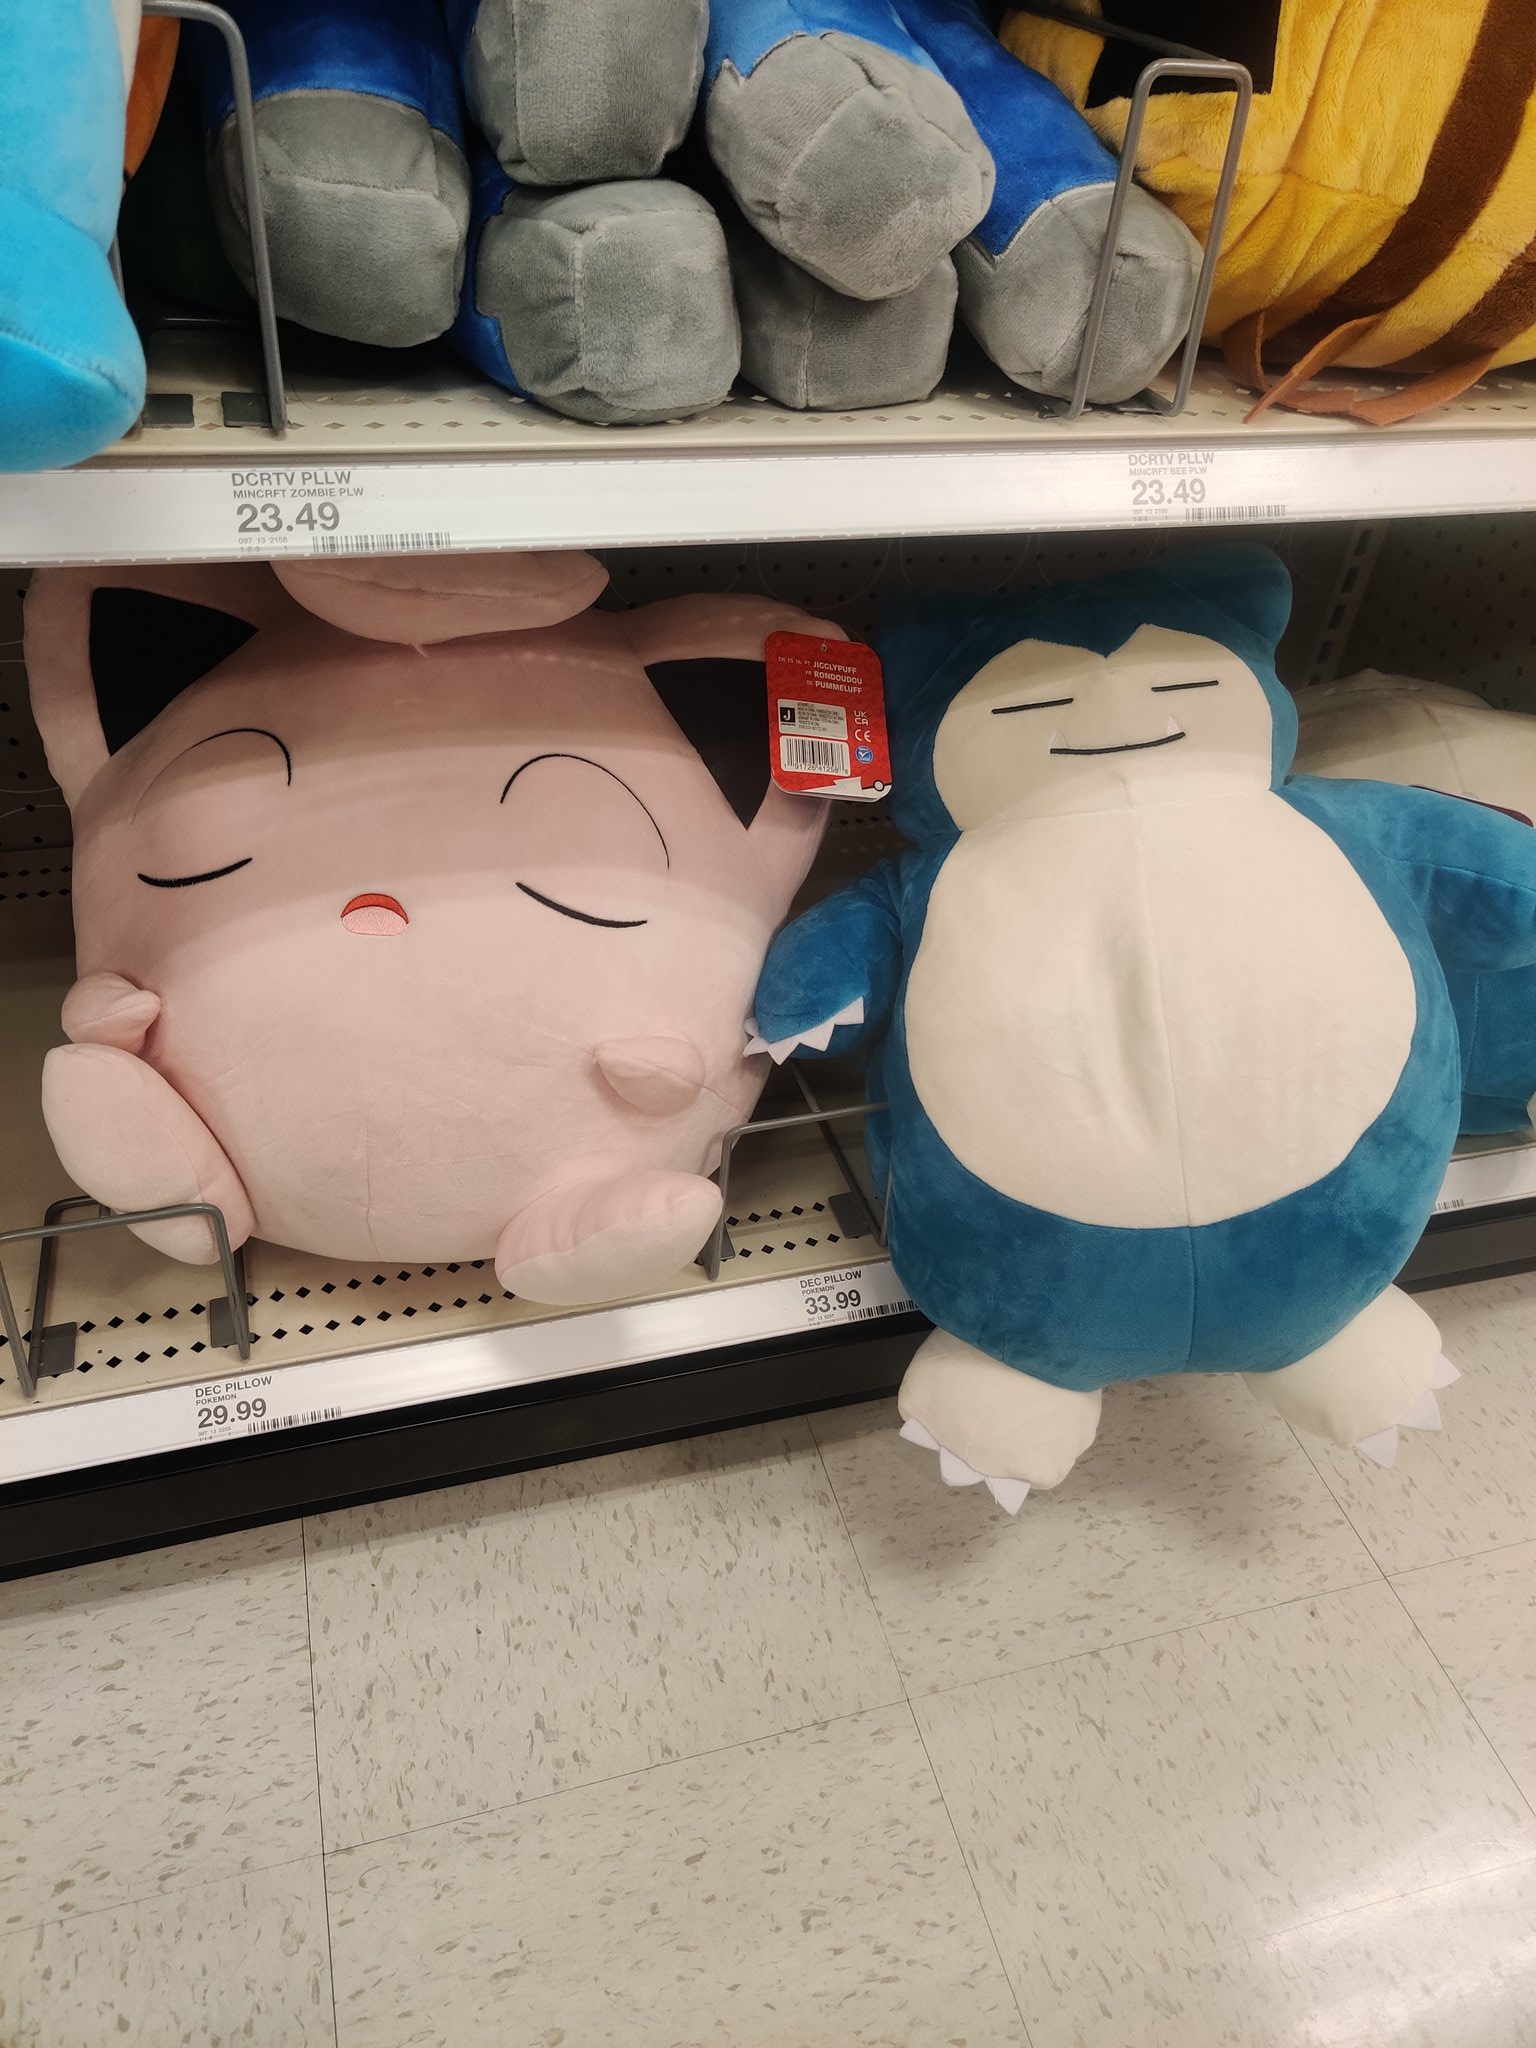 PokeBeach.com💧 on X: They have the Puff and Snorlax too! https